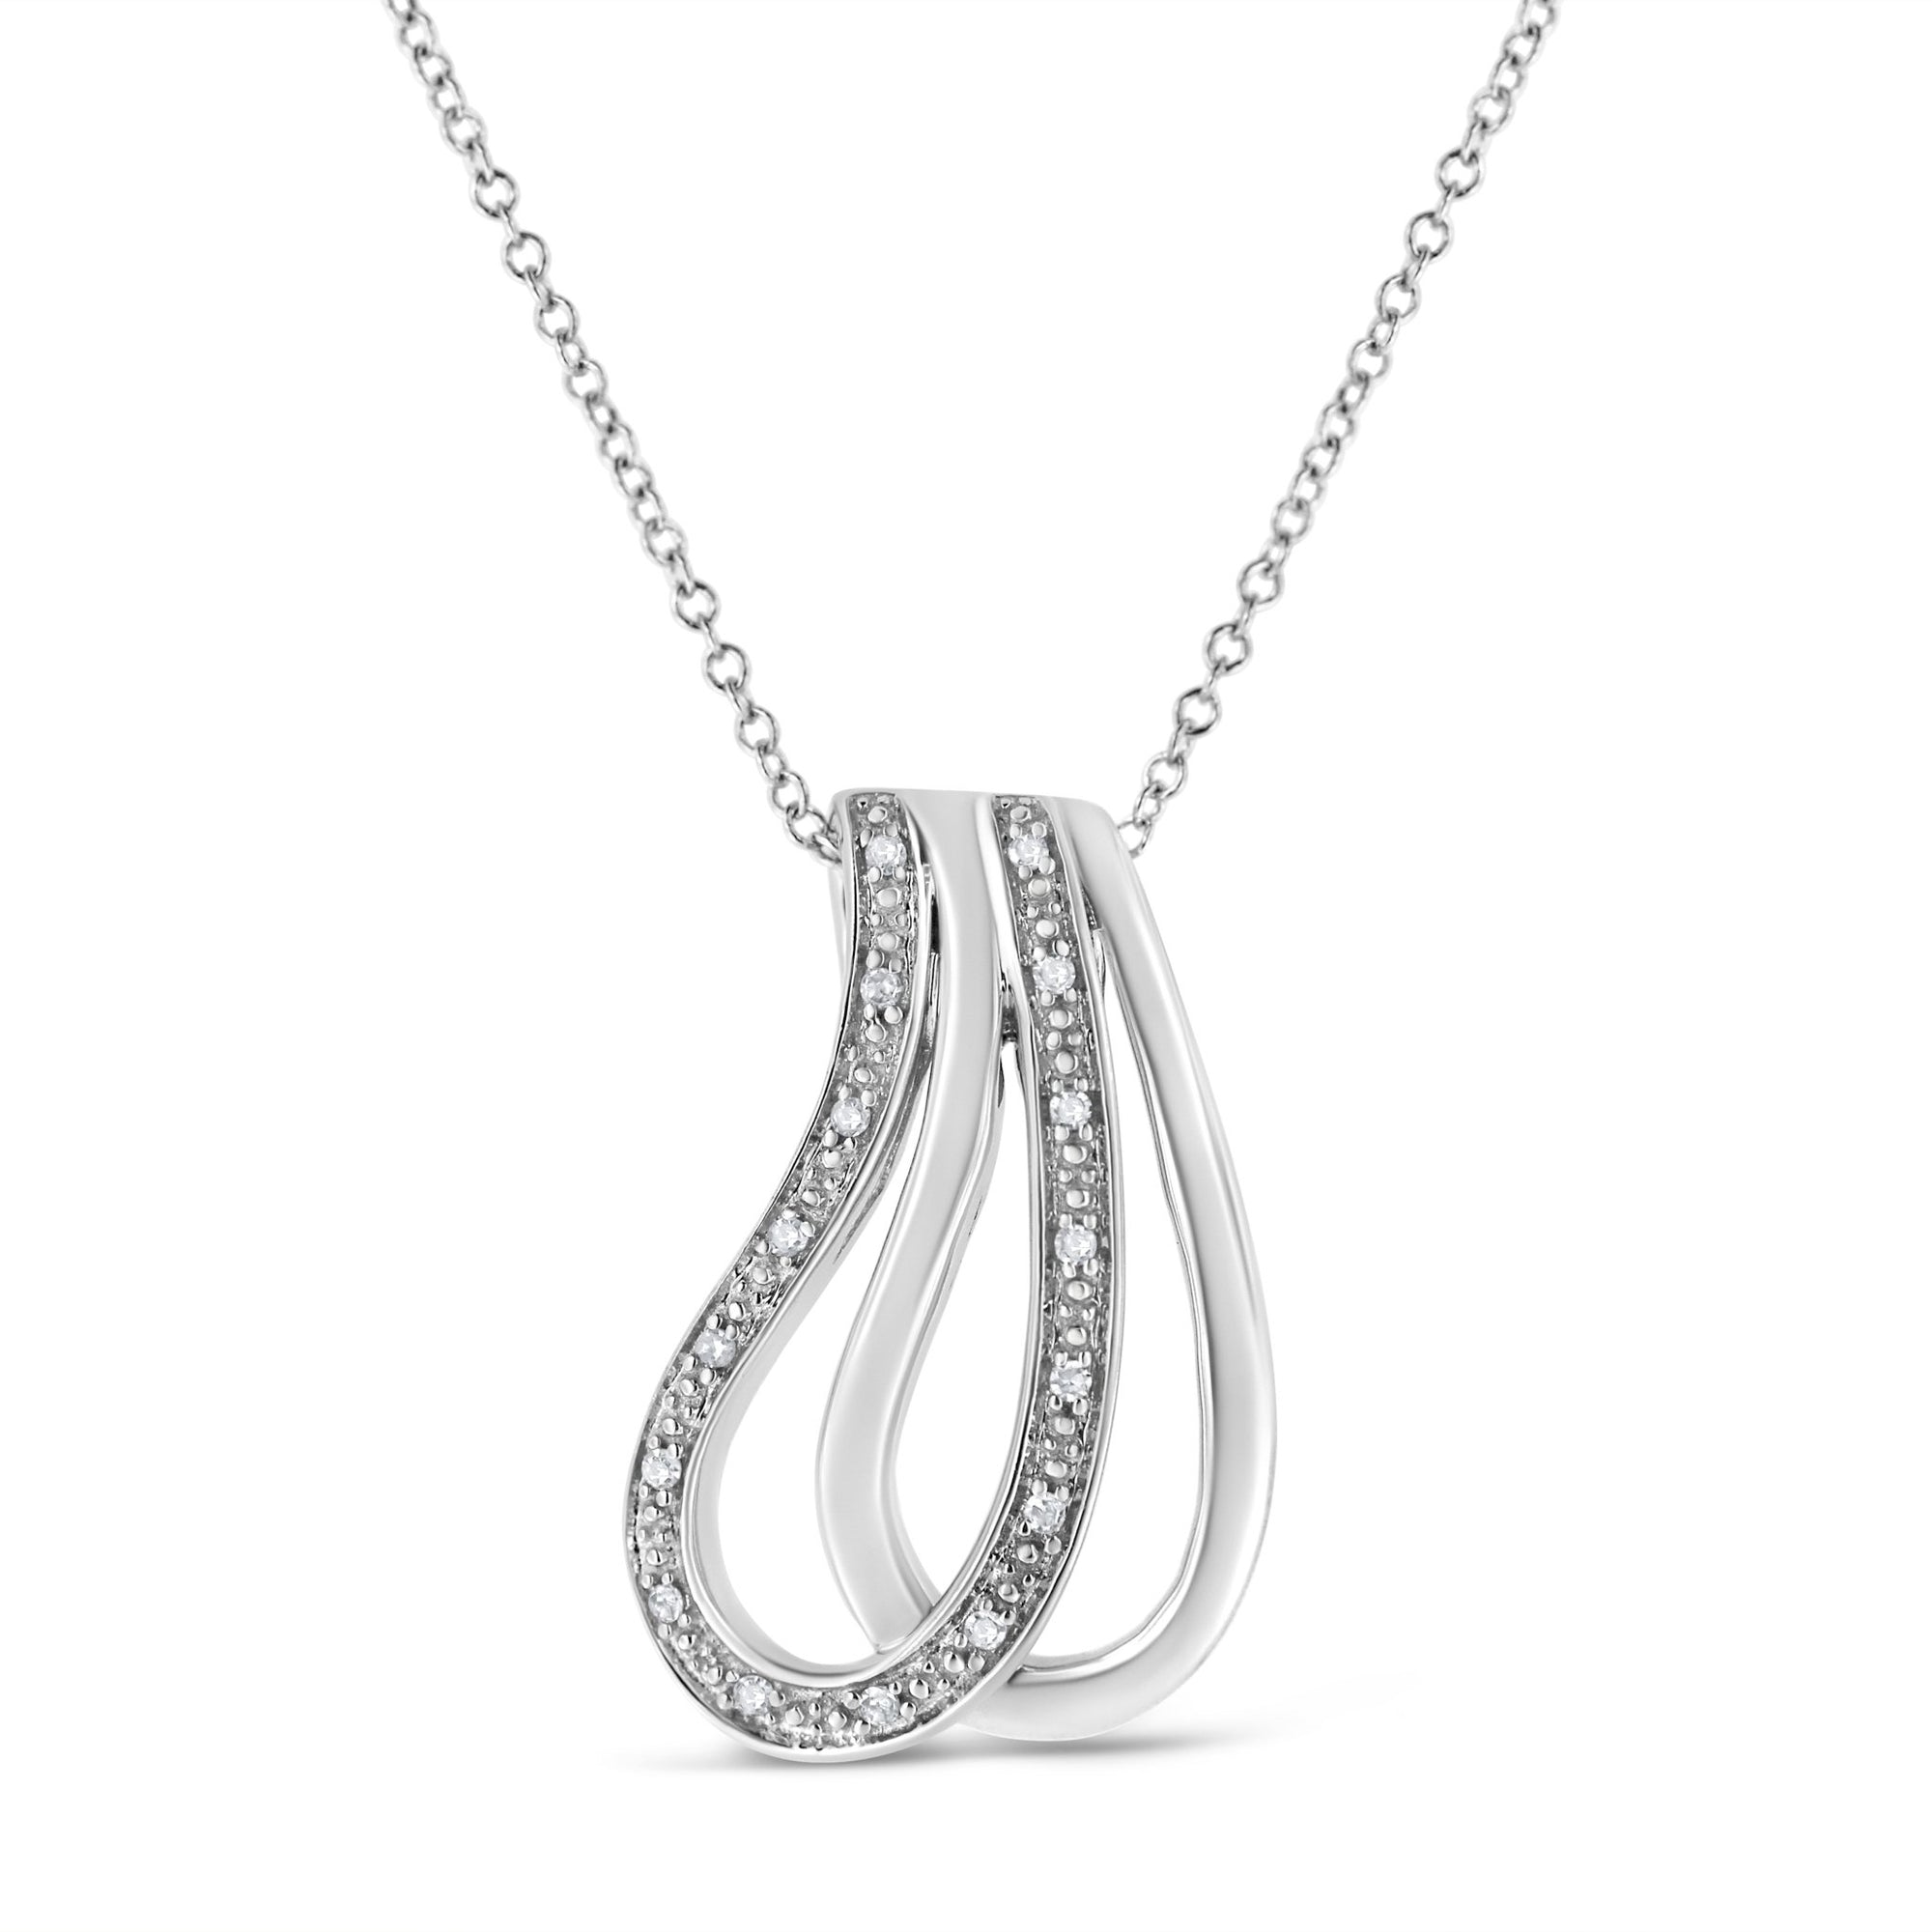 .925 Sterling Silver Pave-Set Diamond Accent Double Curve 18" Pendant Necklace (I-J Color, I1-I2 Clarity) - LinkagejewelrydesignLinkagejewelrydesign